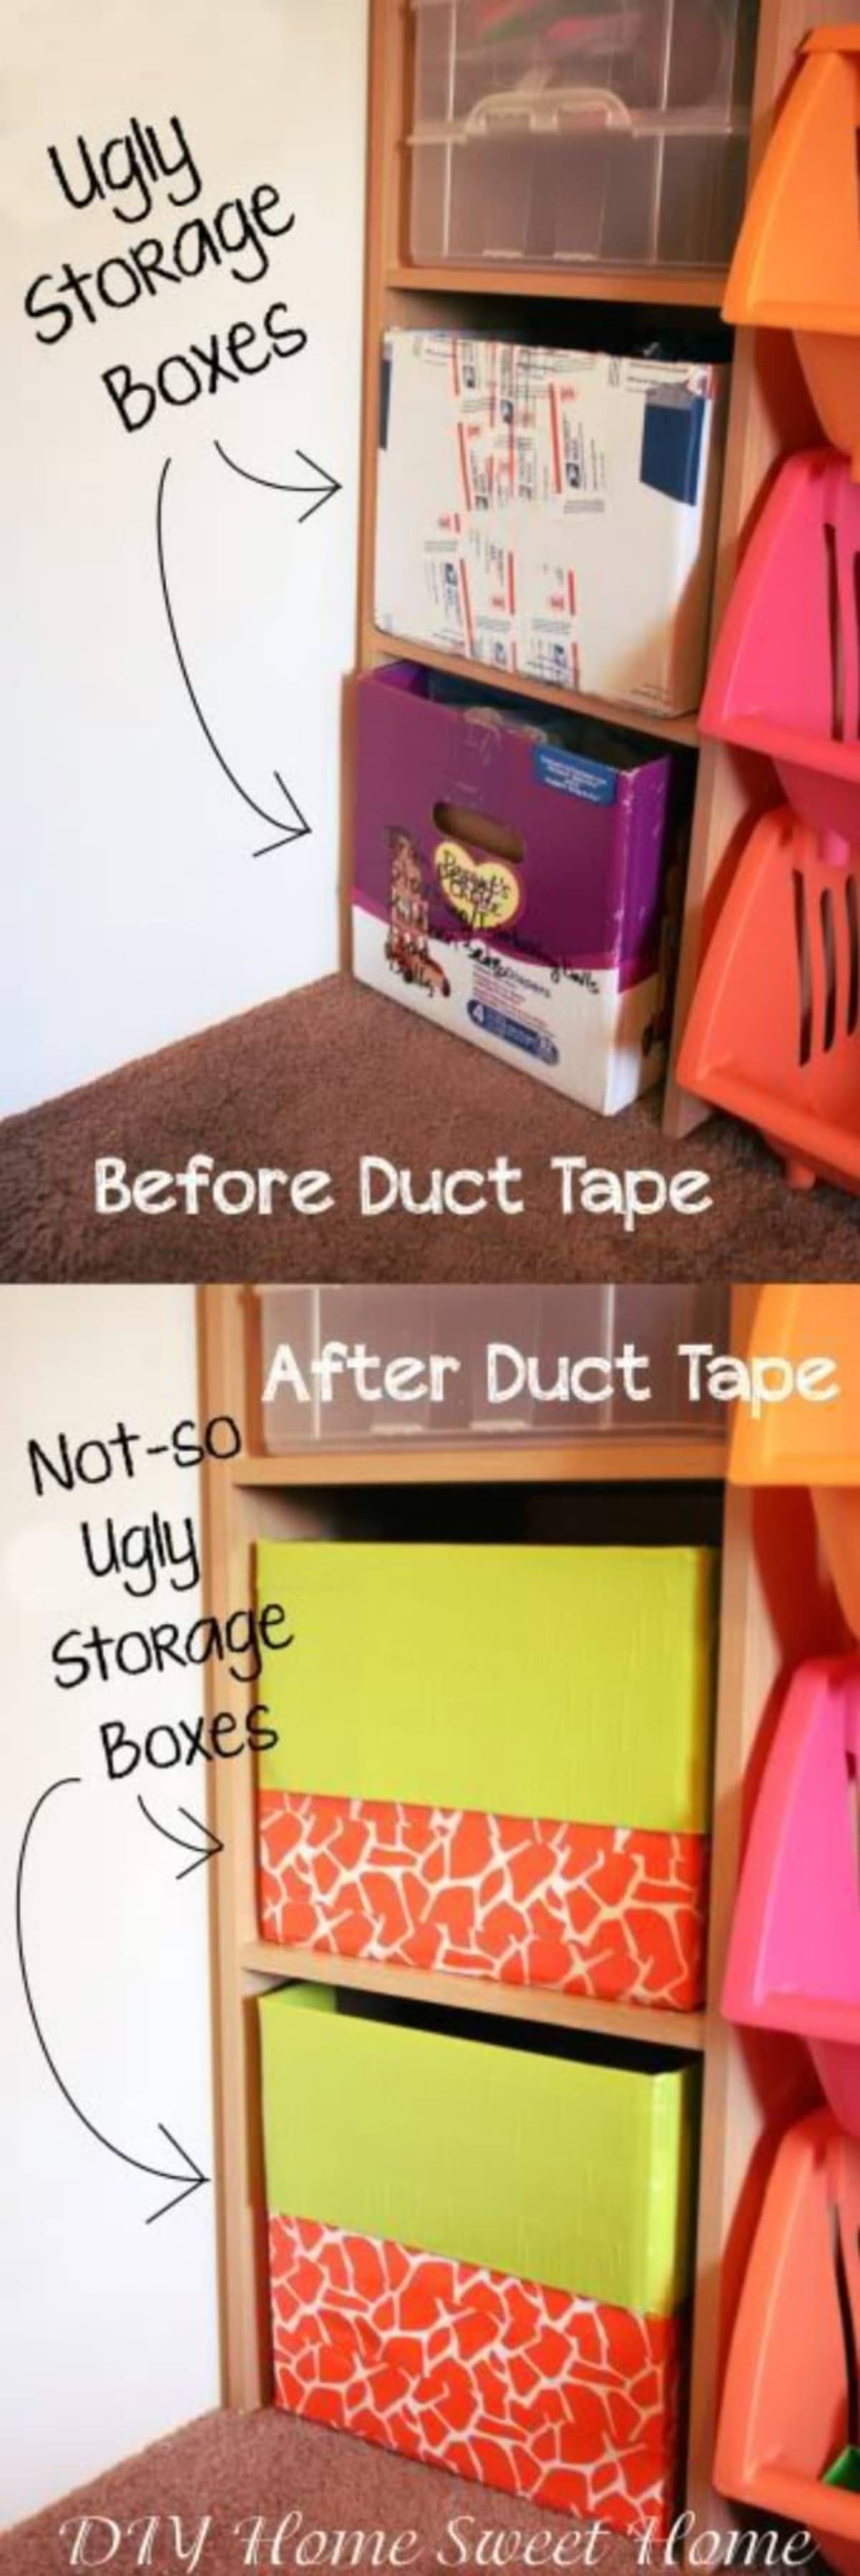 DIY ugly storage boxes before and after.